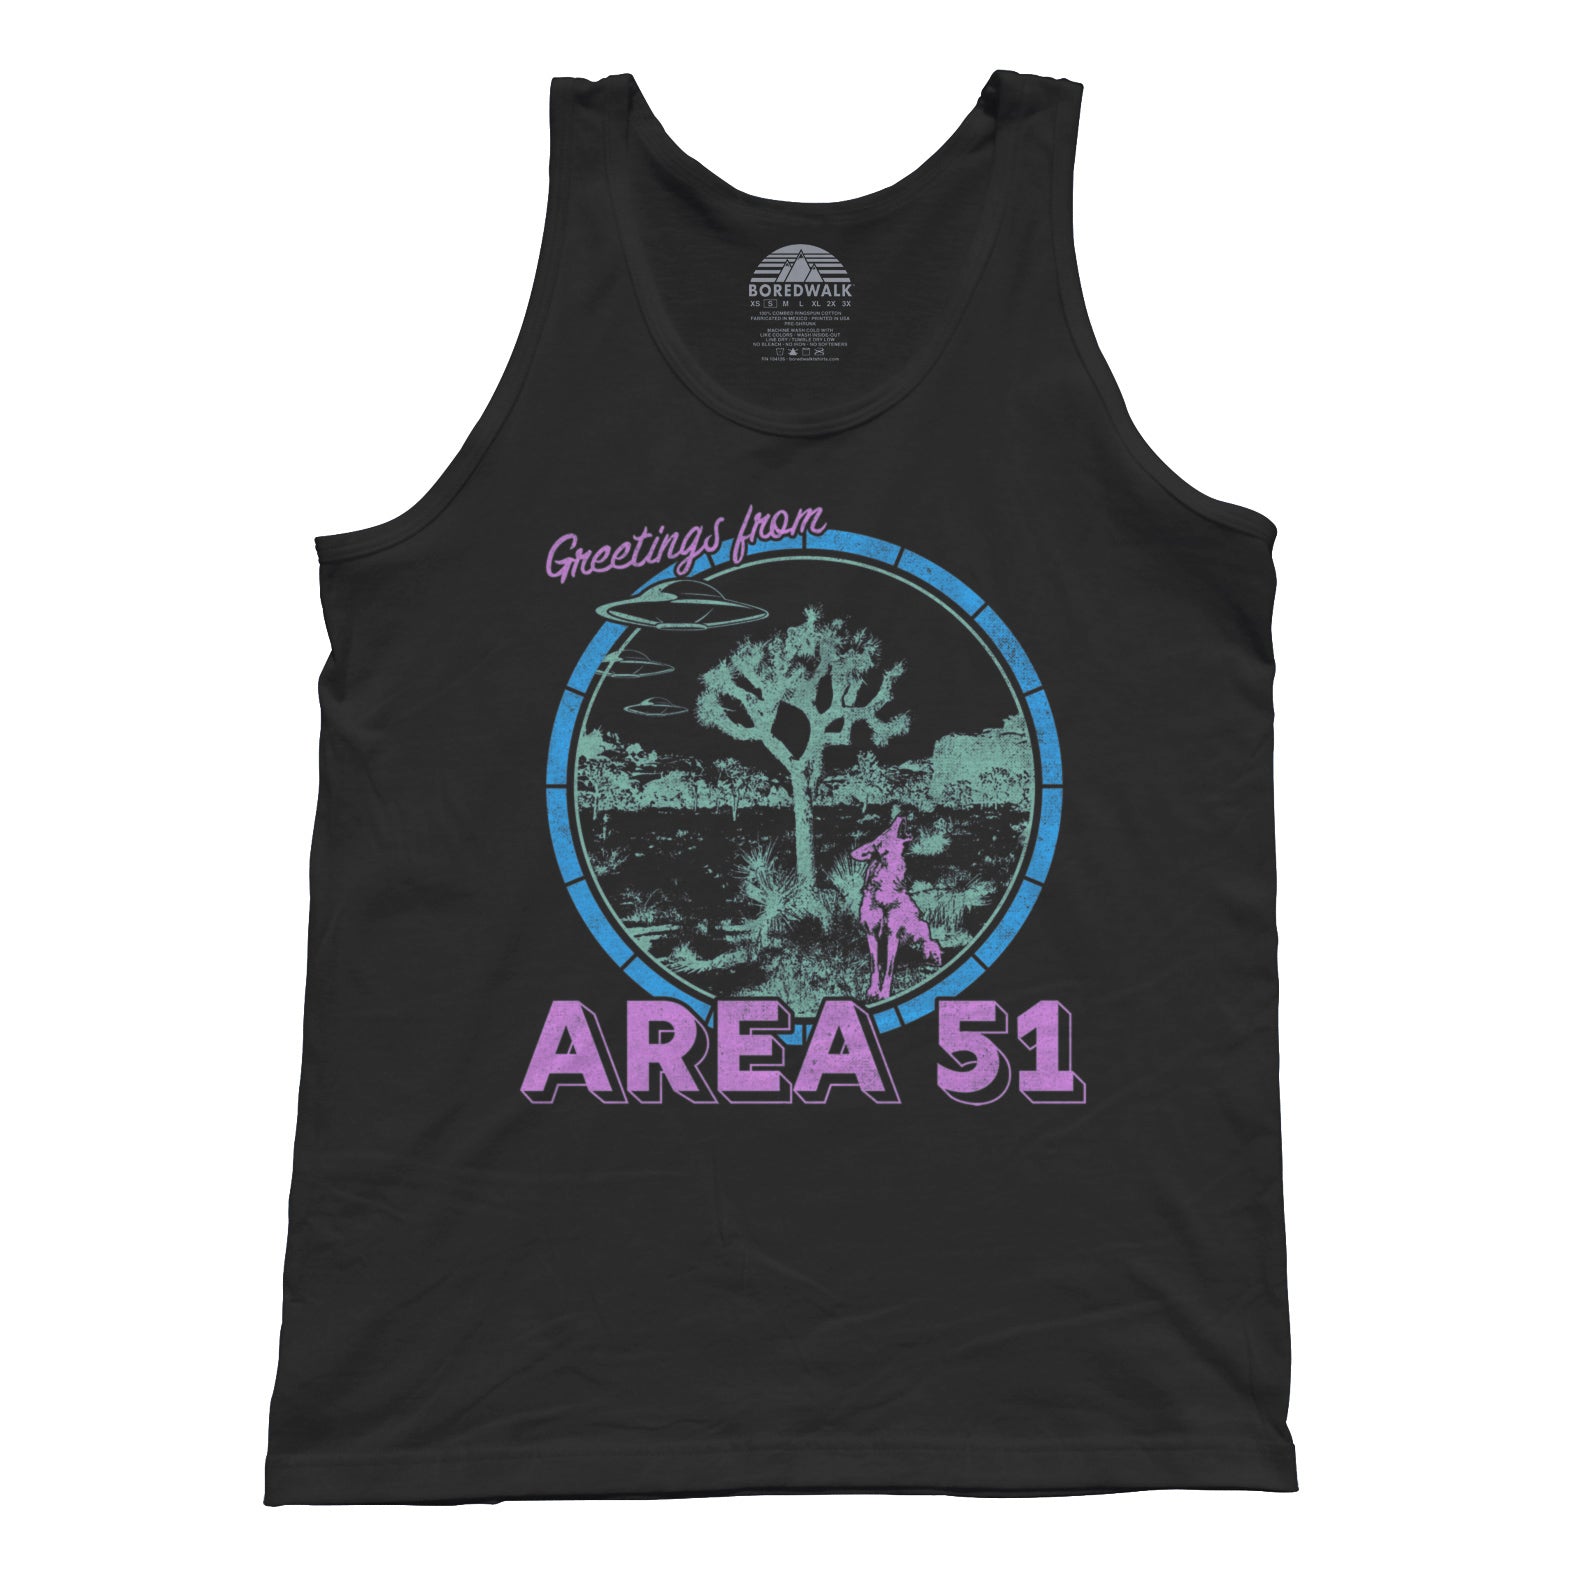 Unisex Greetings from Area 51 Tank Top